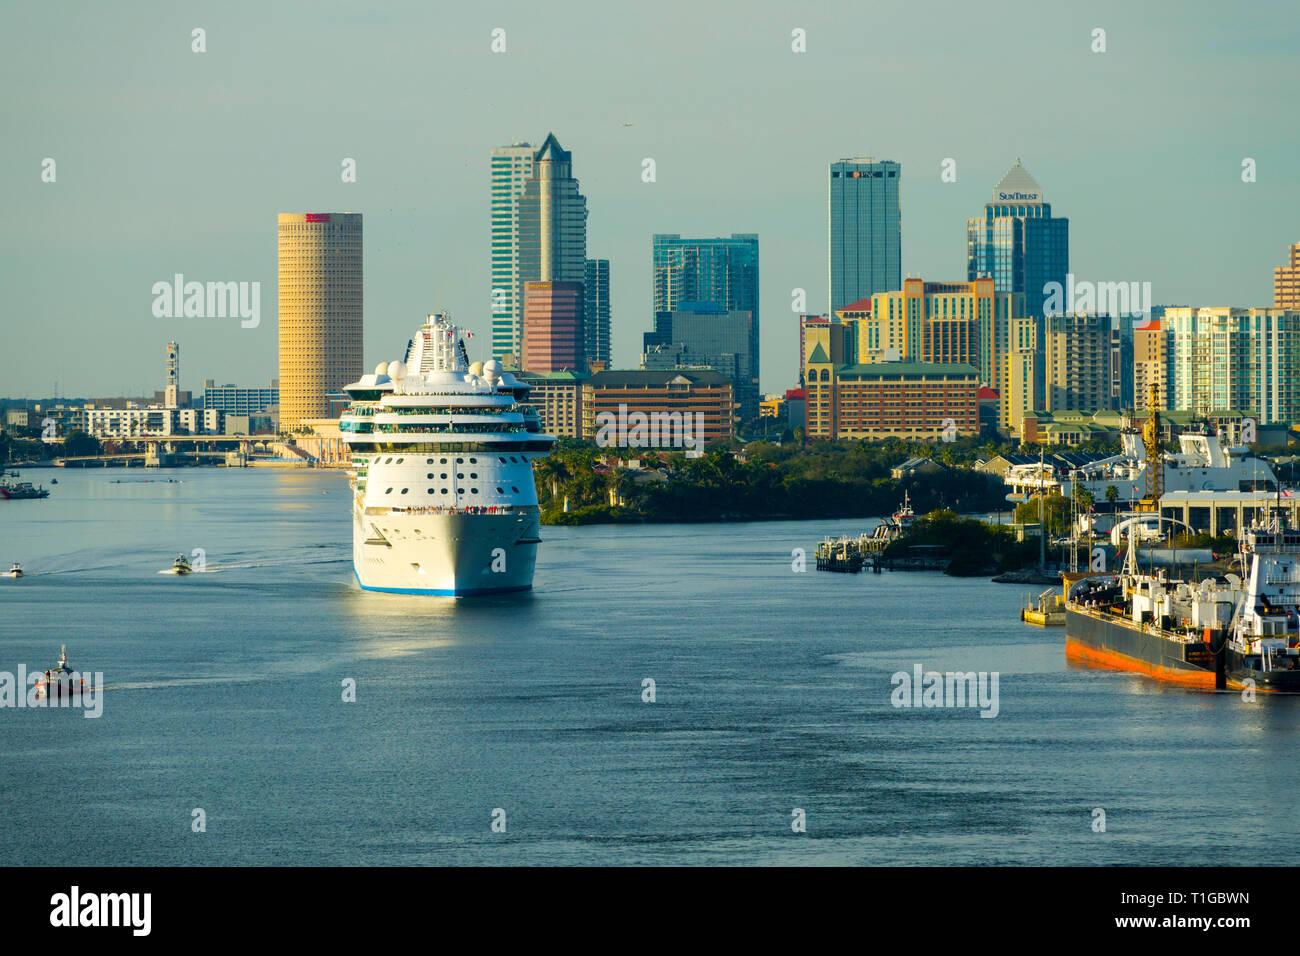 Tampa Florida skyline from the deck of a departing cruise ship on the Hillsbourough River in Tampa Bay with cruise ship Royal Caribbean Brilliance of Stock Photo